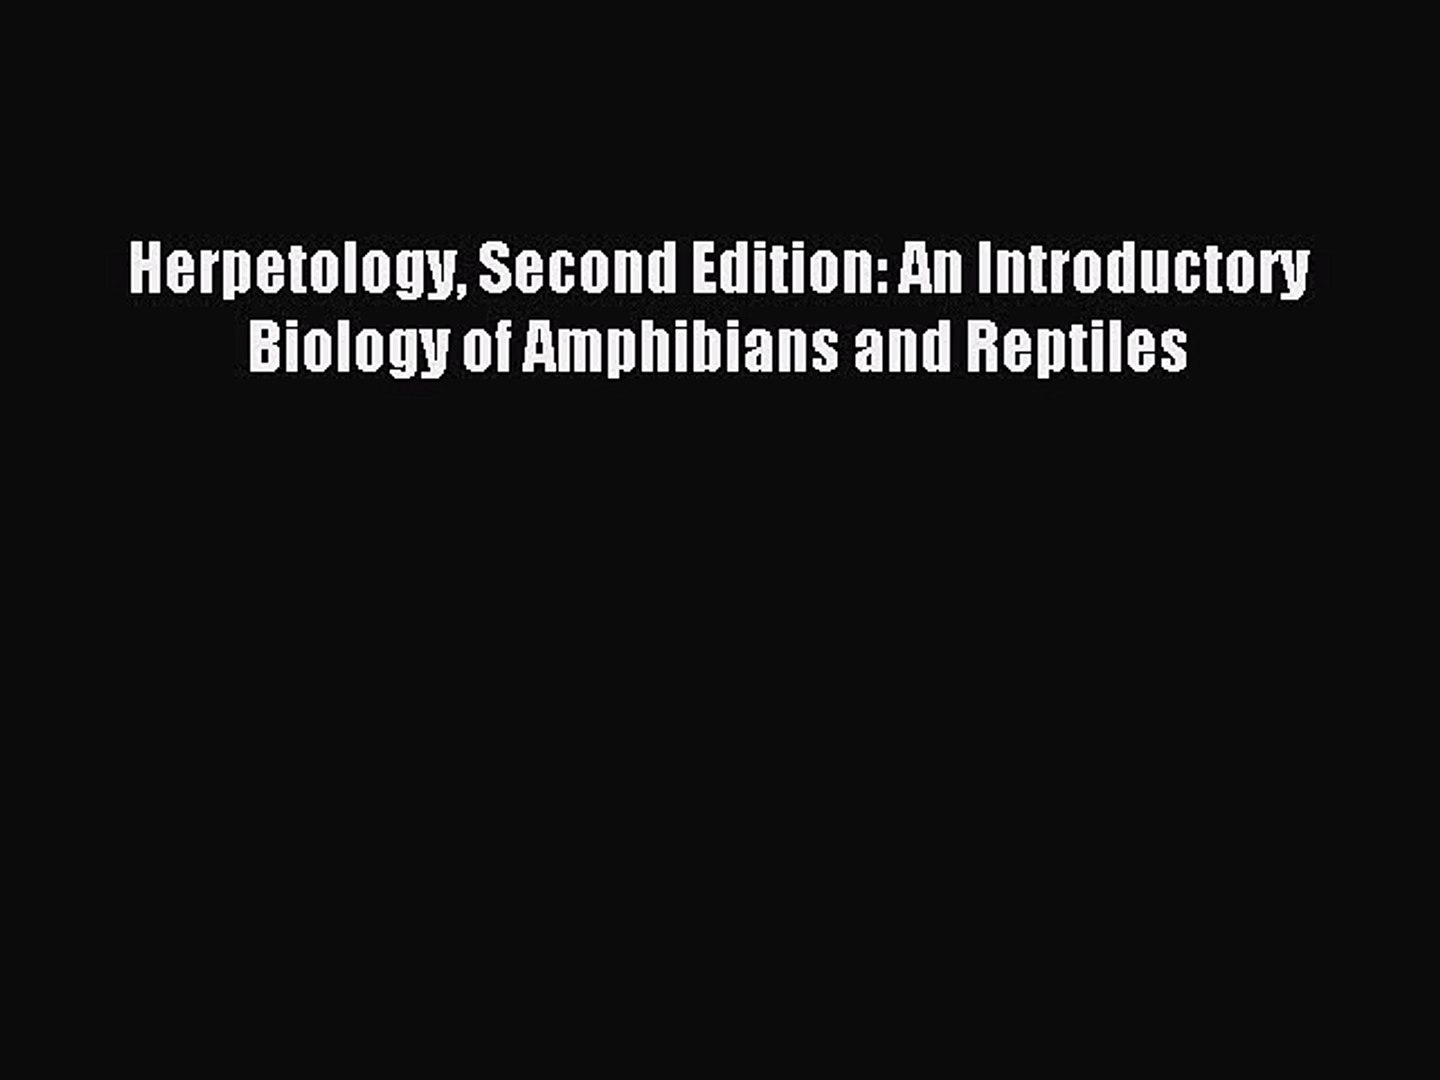 [Read PDF] Herpetology Second Edition: An Introductory Biology of Amphibians and Reptiles Download